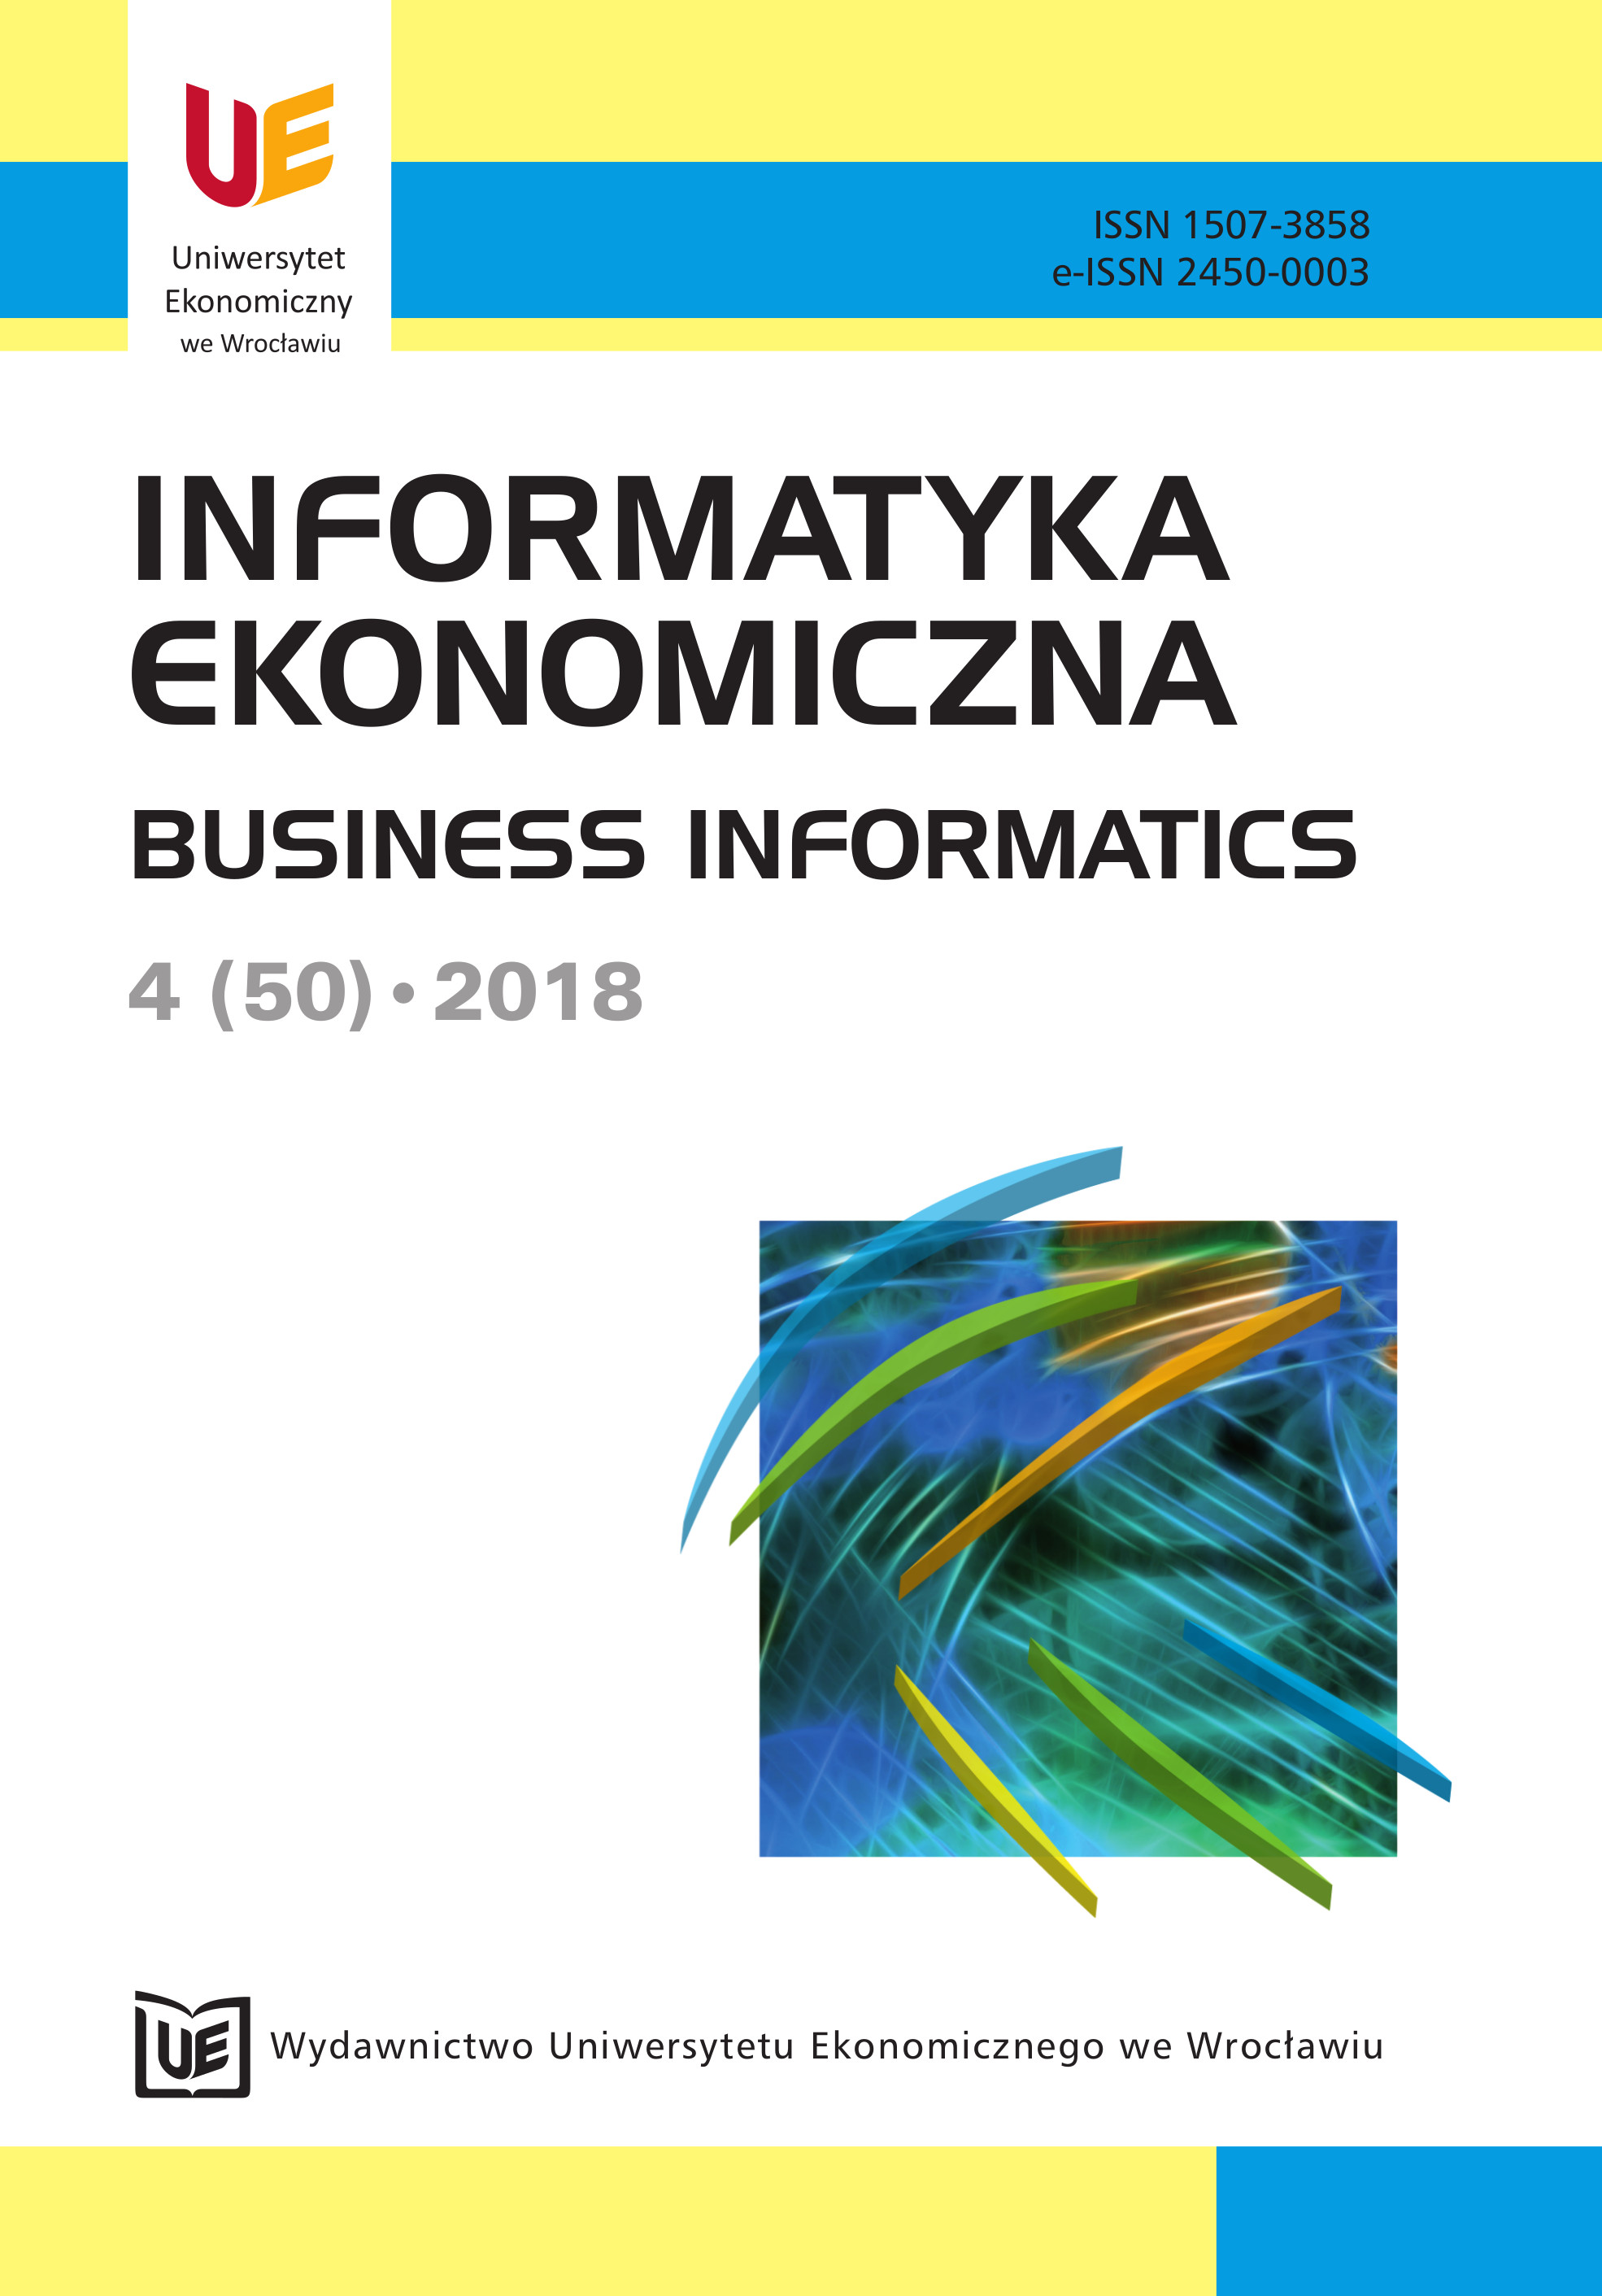 Official web sites as the main source of legal information of Polish entrepreneurs Cover Image